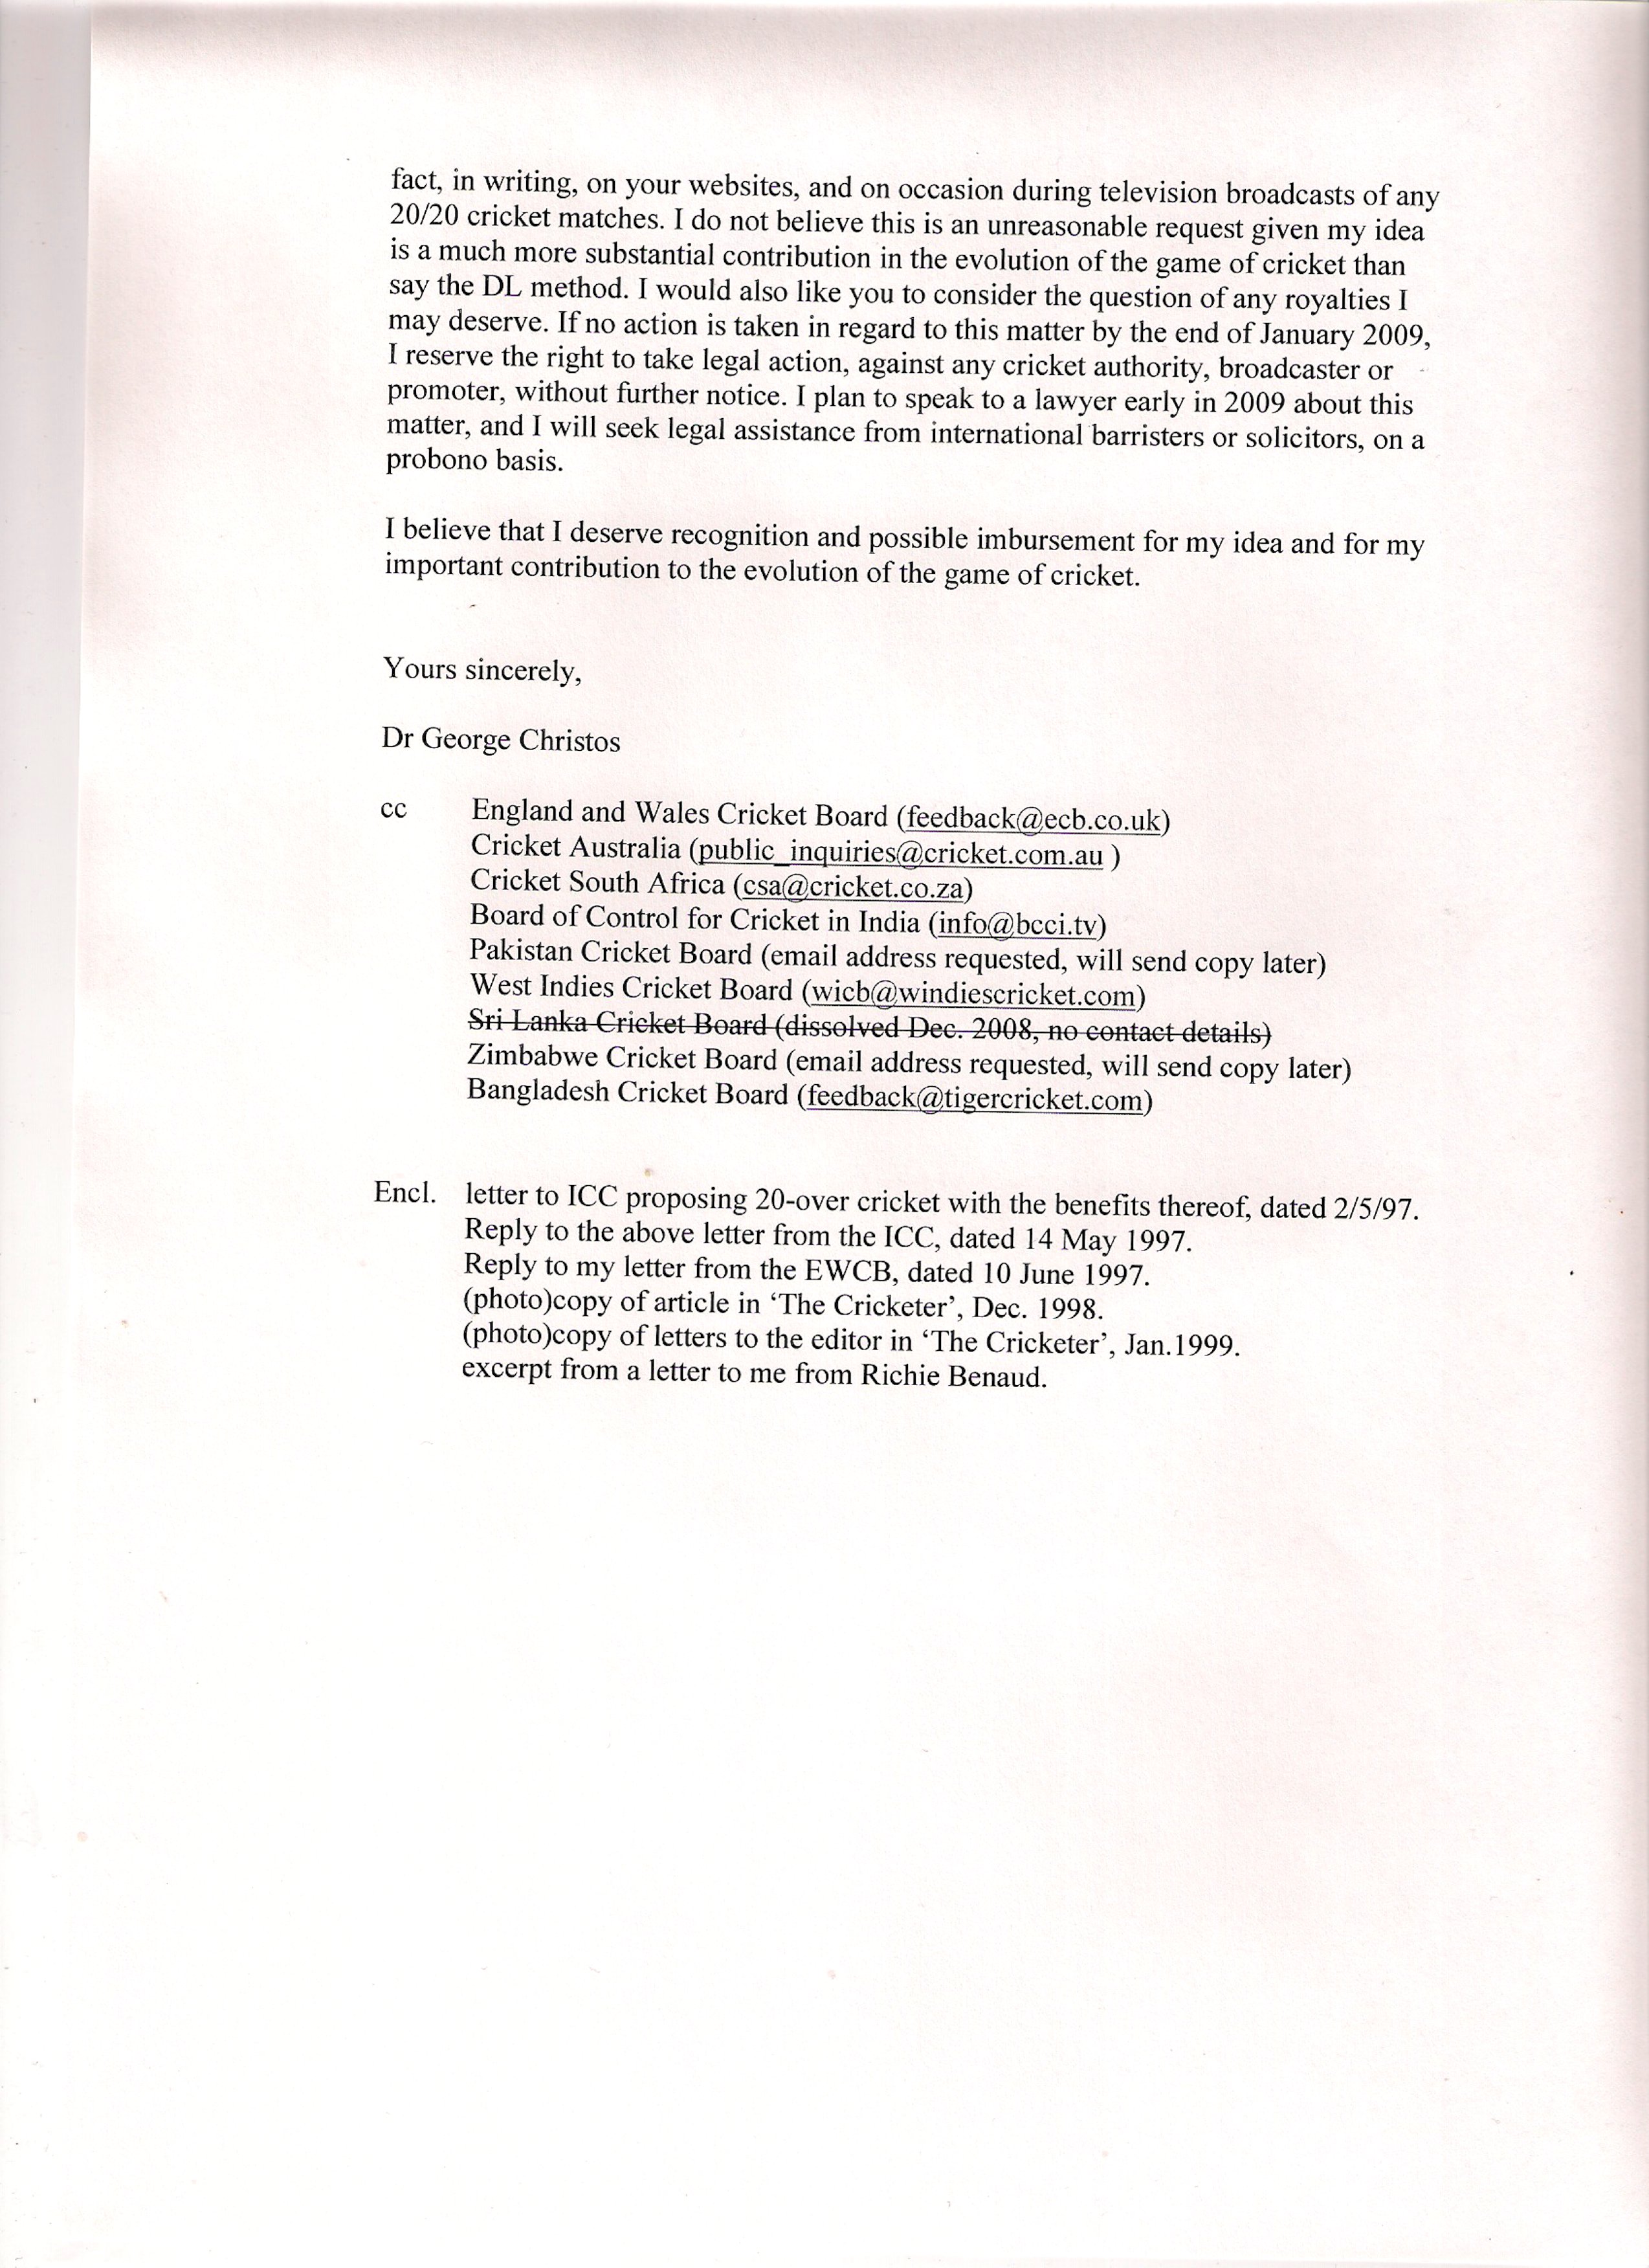 letter Dr Christos to ICC, 2008, page 2 0f 3